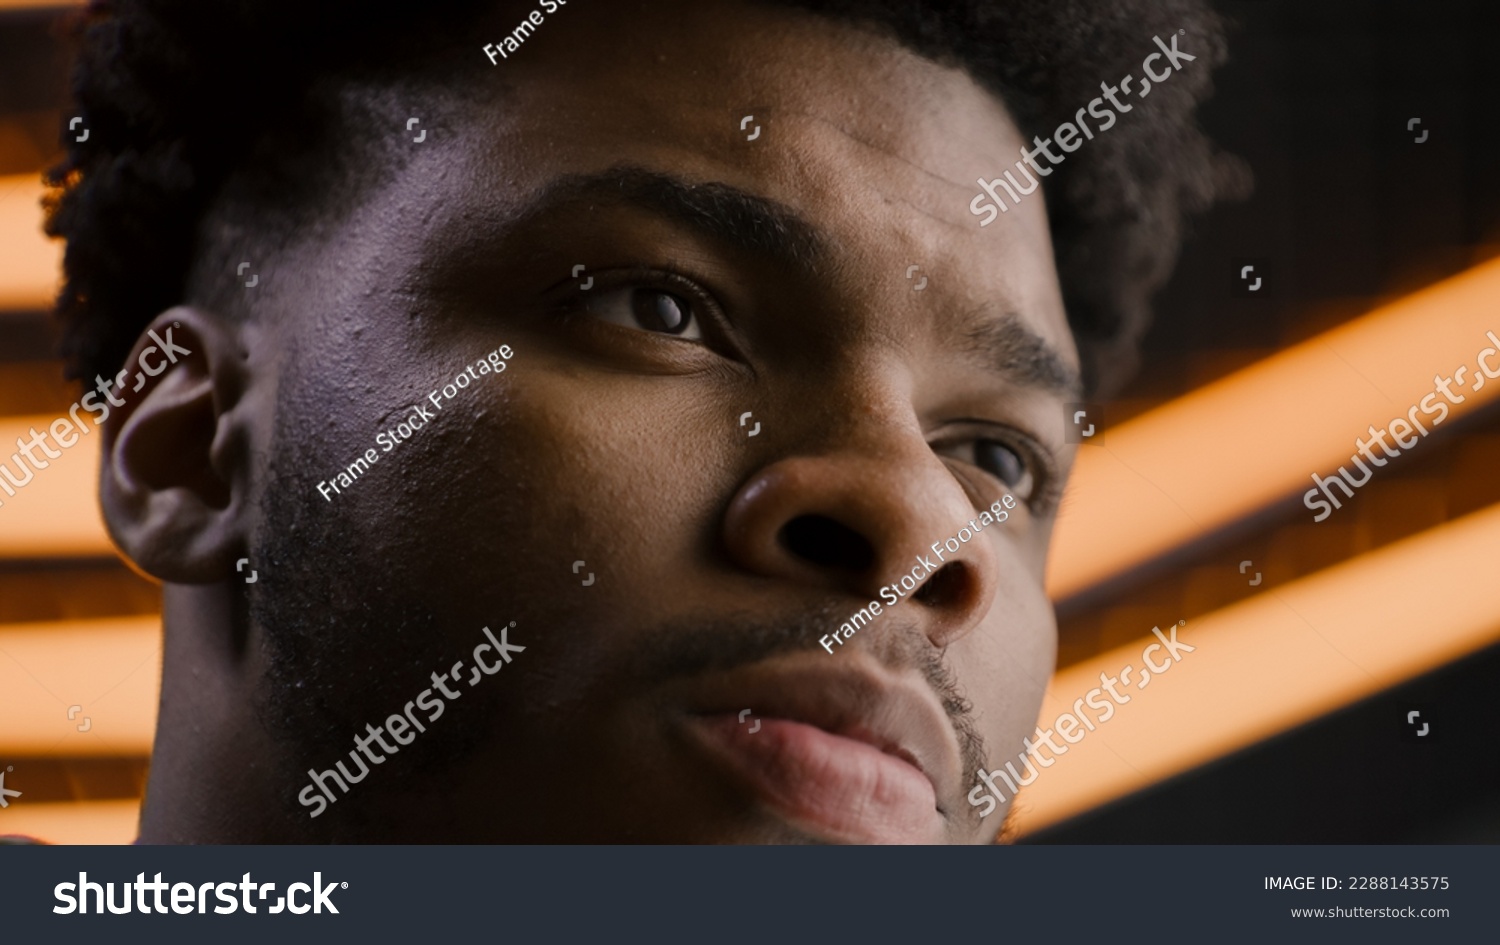 Young African American man straight and serious face with confident deep look. Focused worker looks away, blinks eyes, poses on camera. LED lamps on background in studio or office. Close up portrait. #2288143575